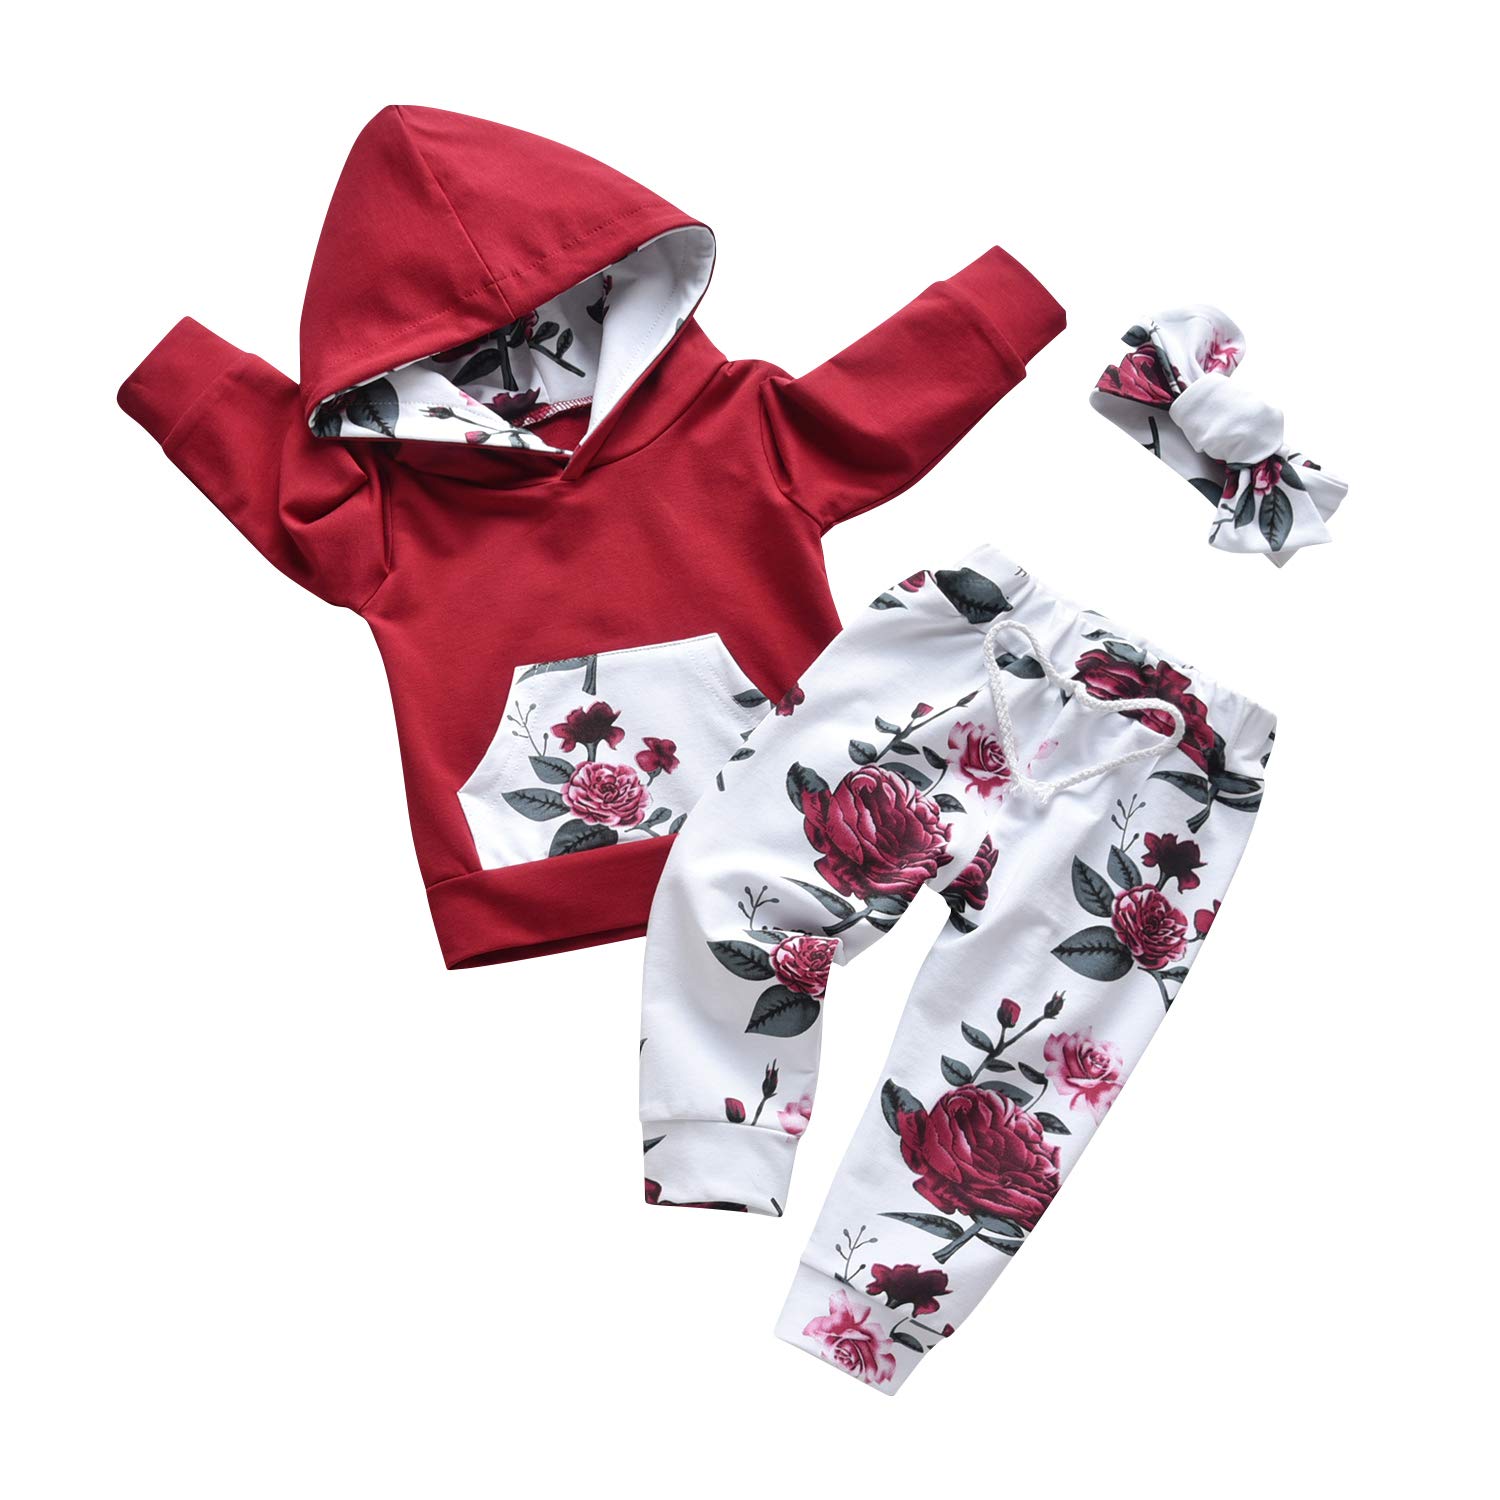 Baby Girl Clothes Long Sleeve Floral Hoodie Sweatshirt Pants with Pocket Headband Outfit Sets